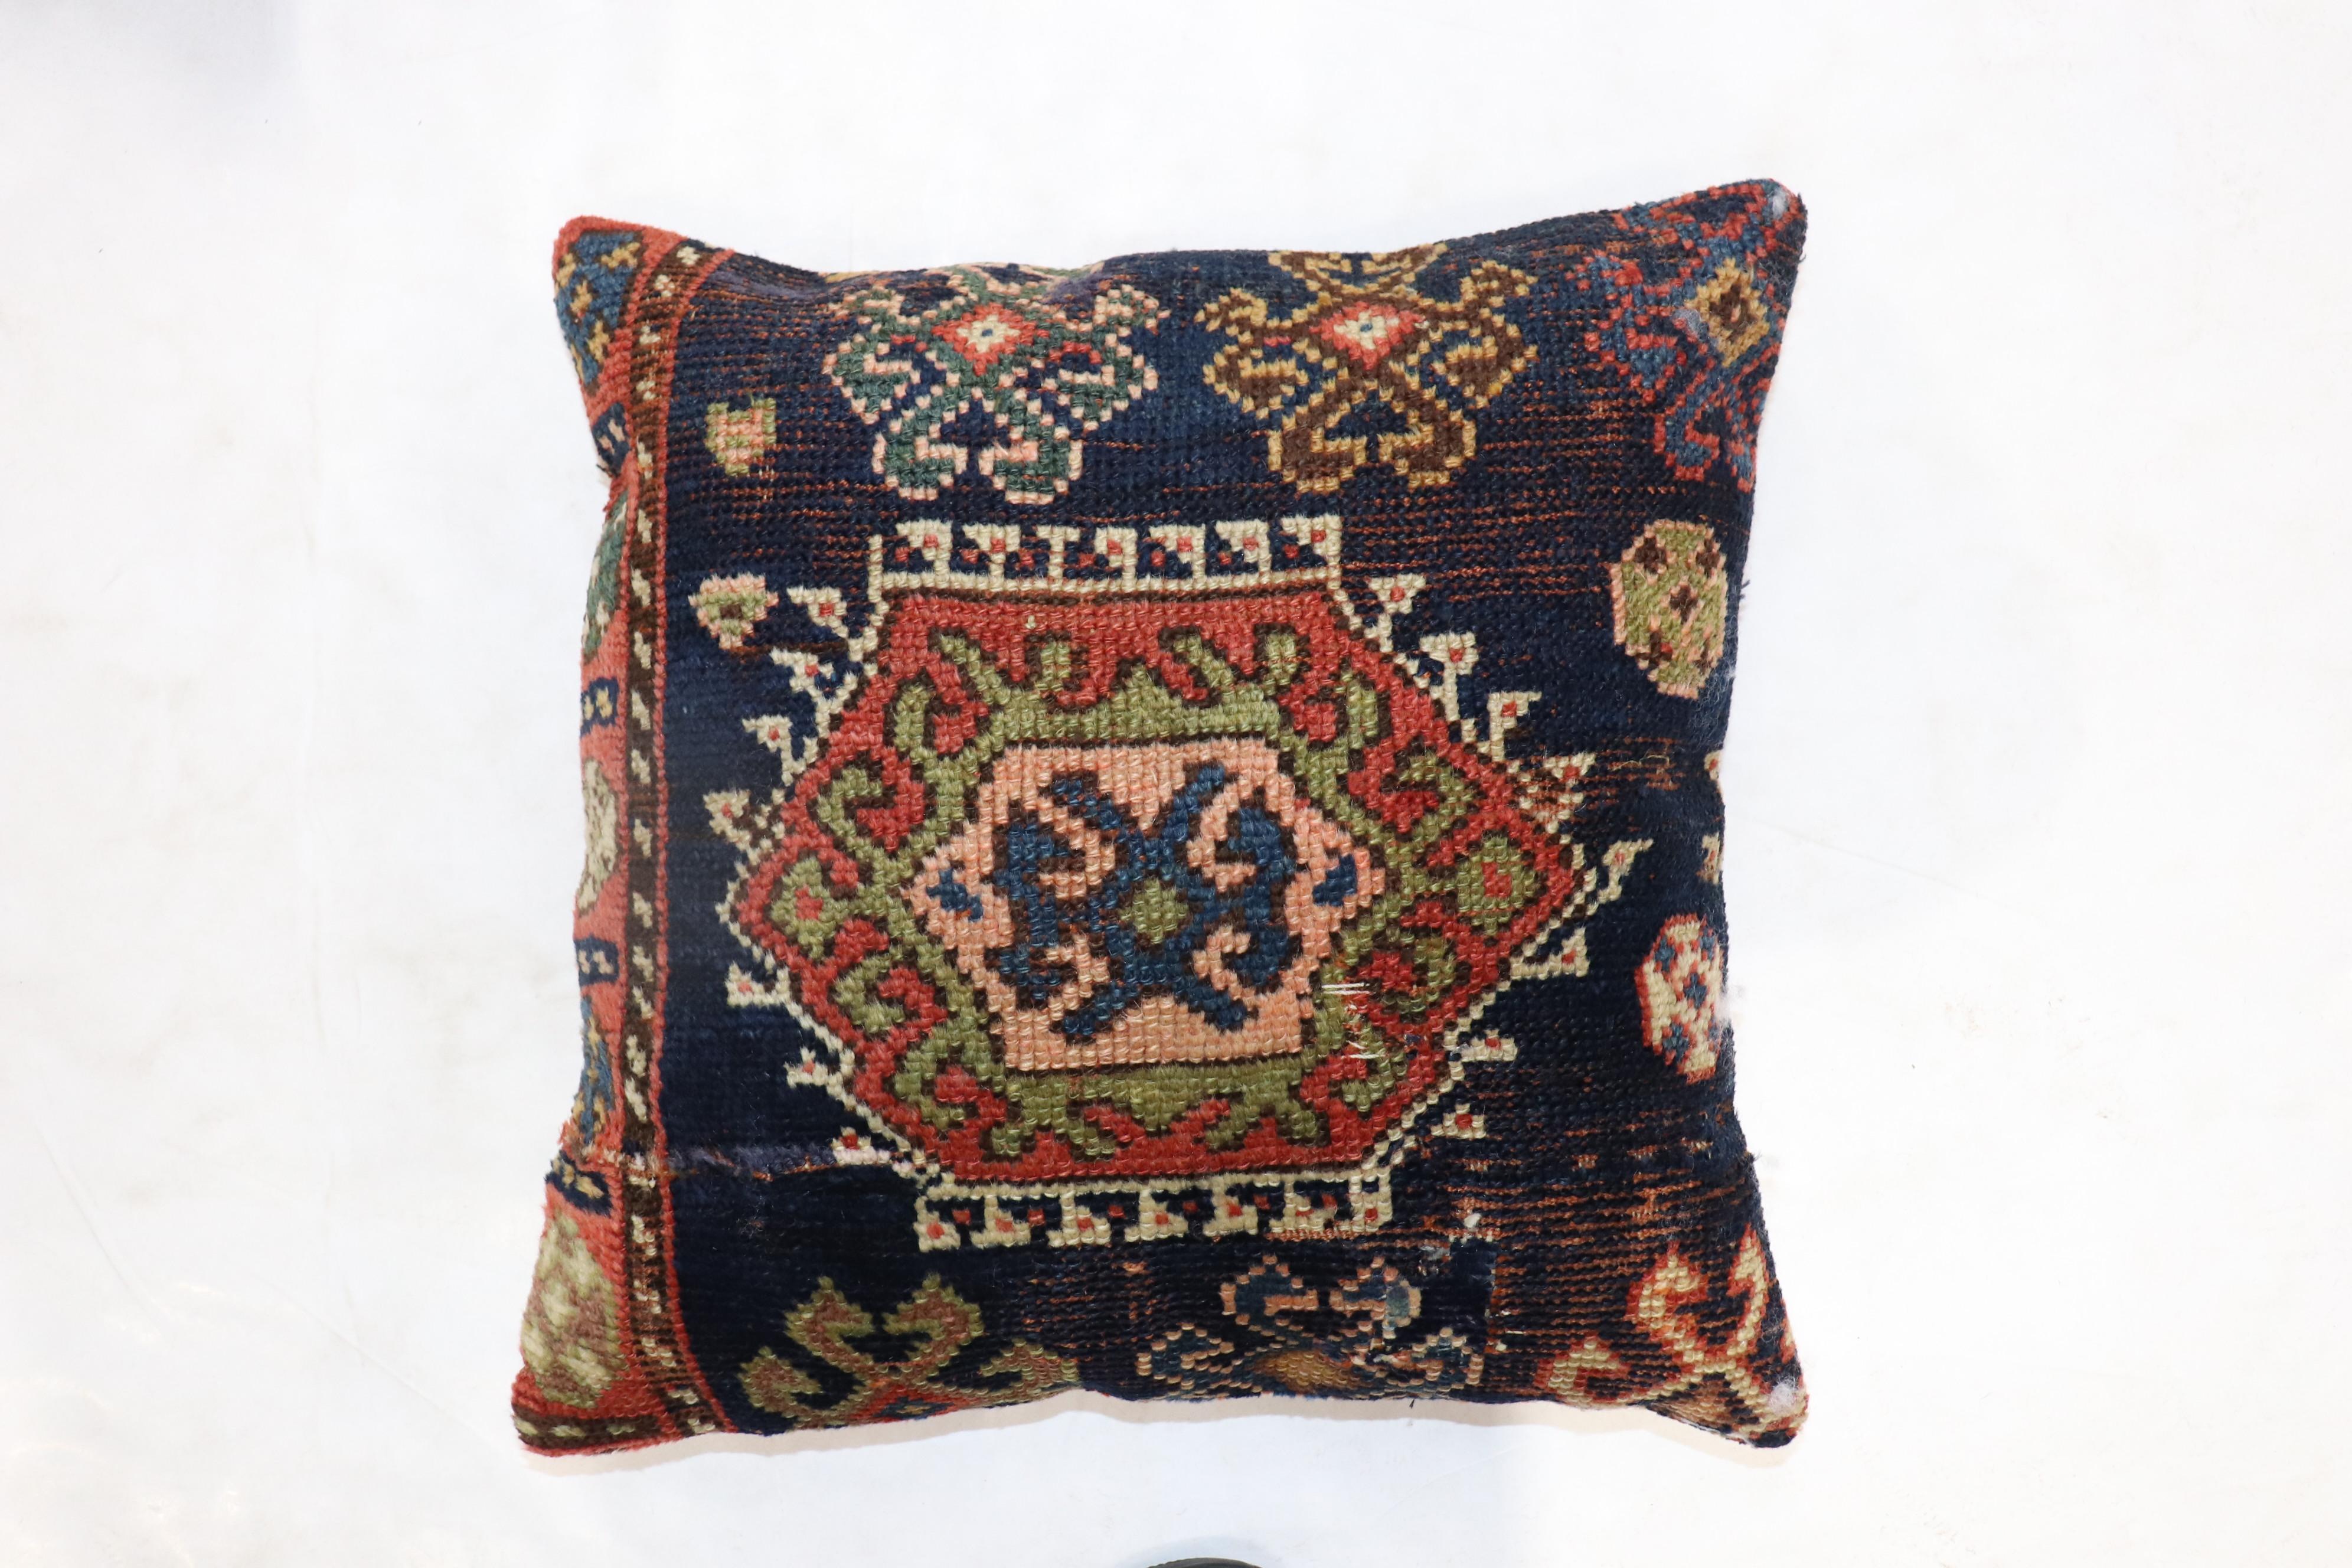 Pillow made from an early 20th century Antique Cucasian rug. Zipper closure and poly-fill provided.

Measures: 19'' x 20''.